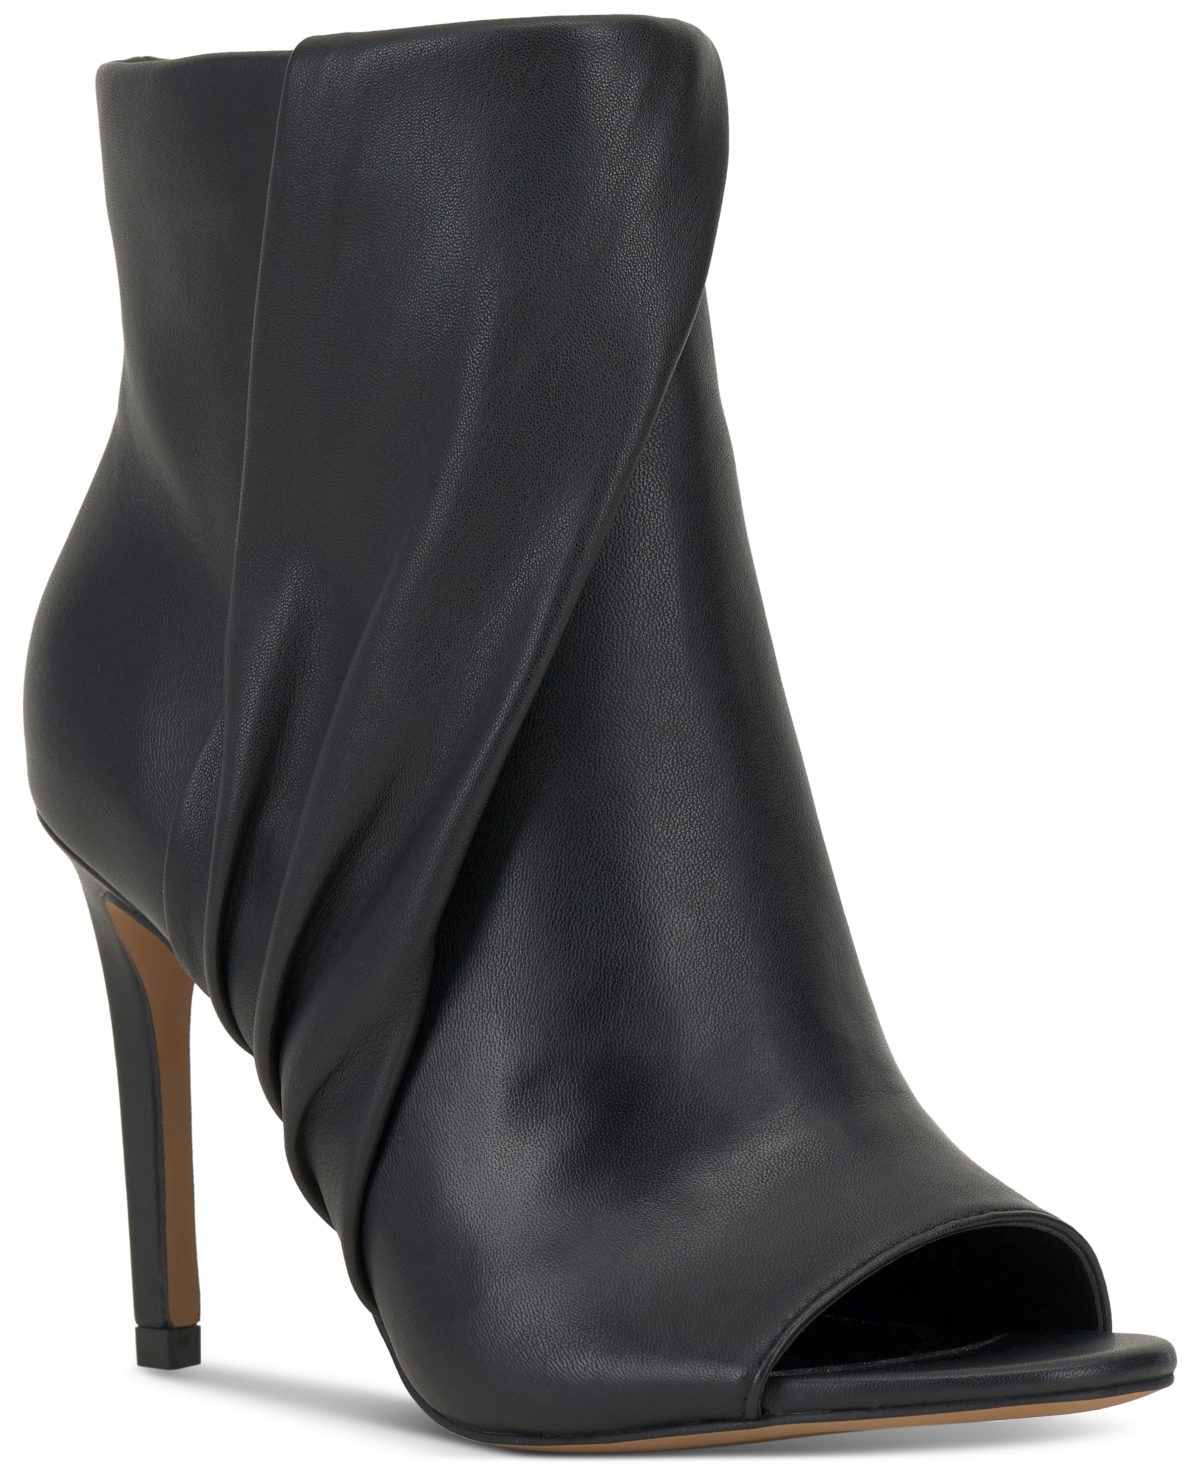 VINCE CAMUTO WOMEN'S ATONNA RUCHED DRESS BOOTIES